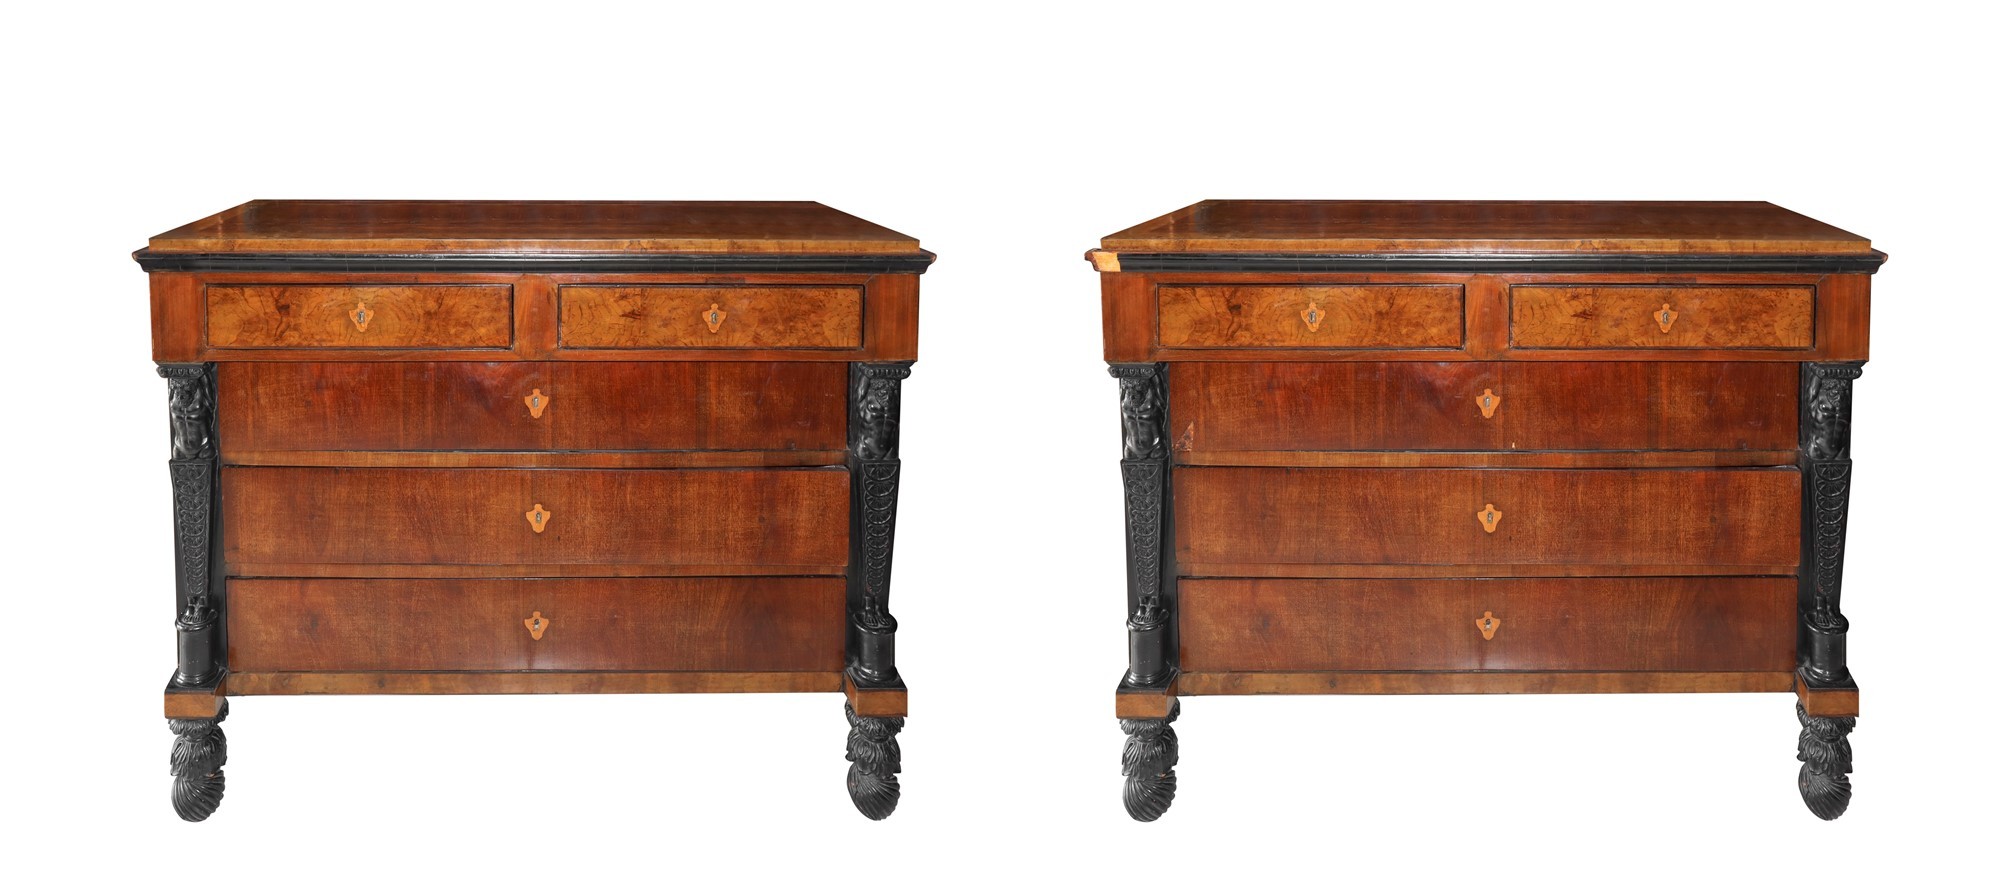 Empire chest of drawers in walnut wood, Early 19th century